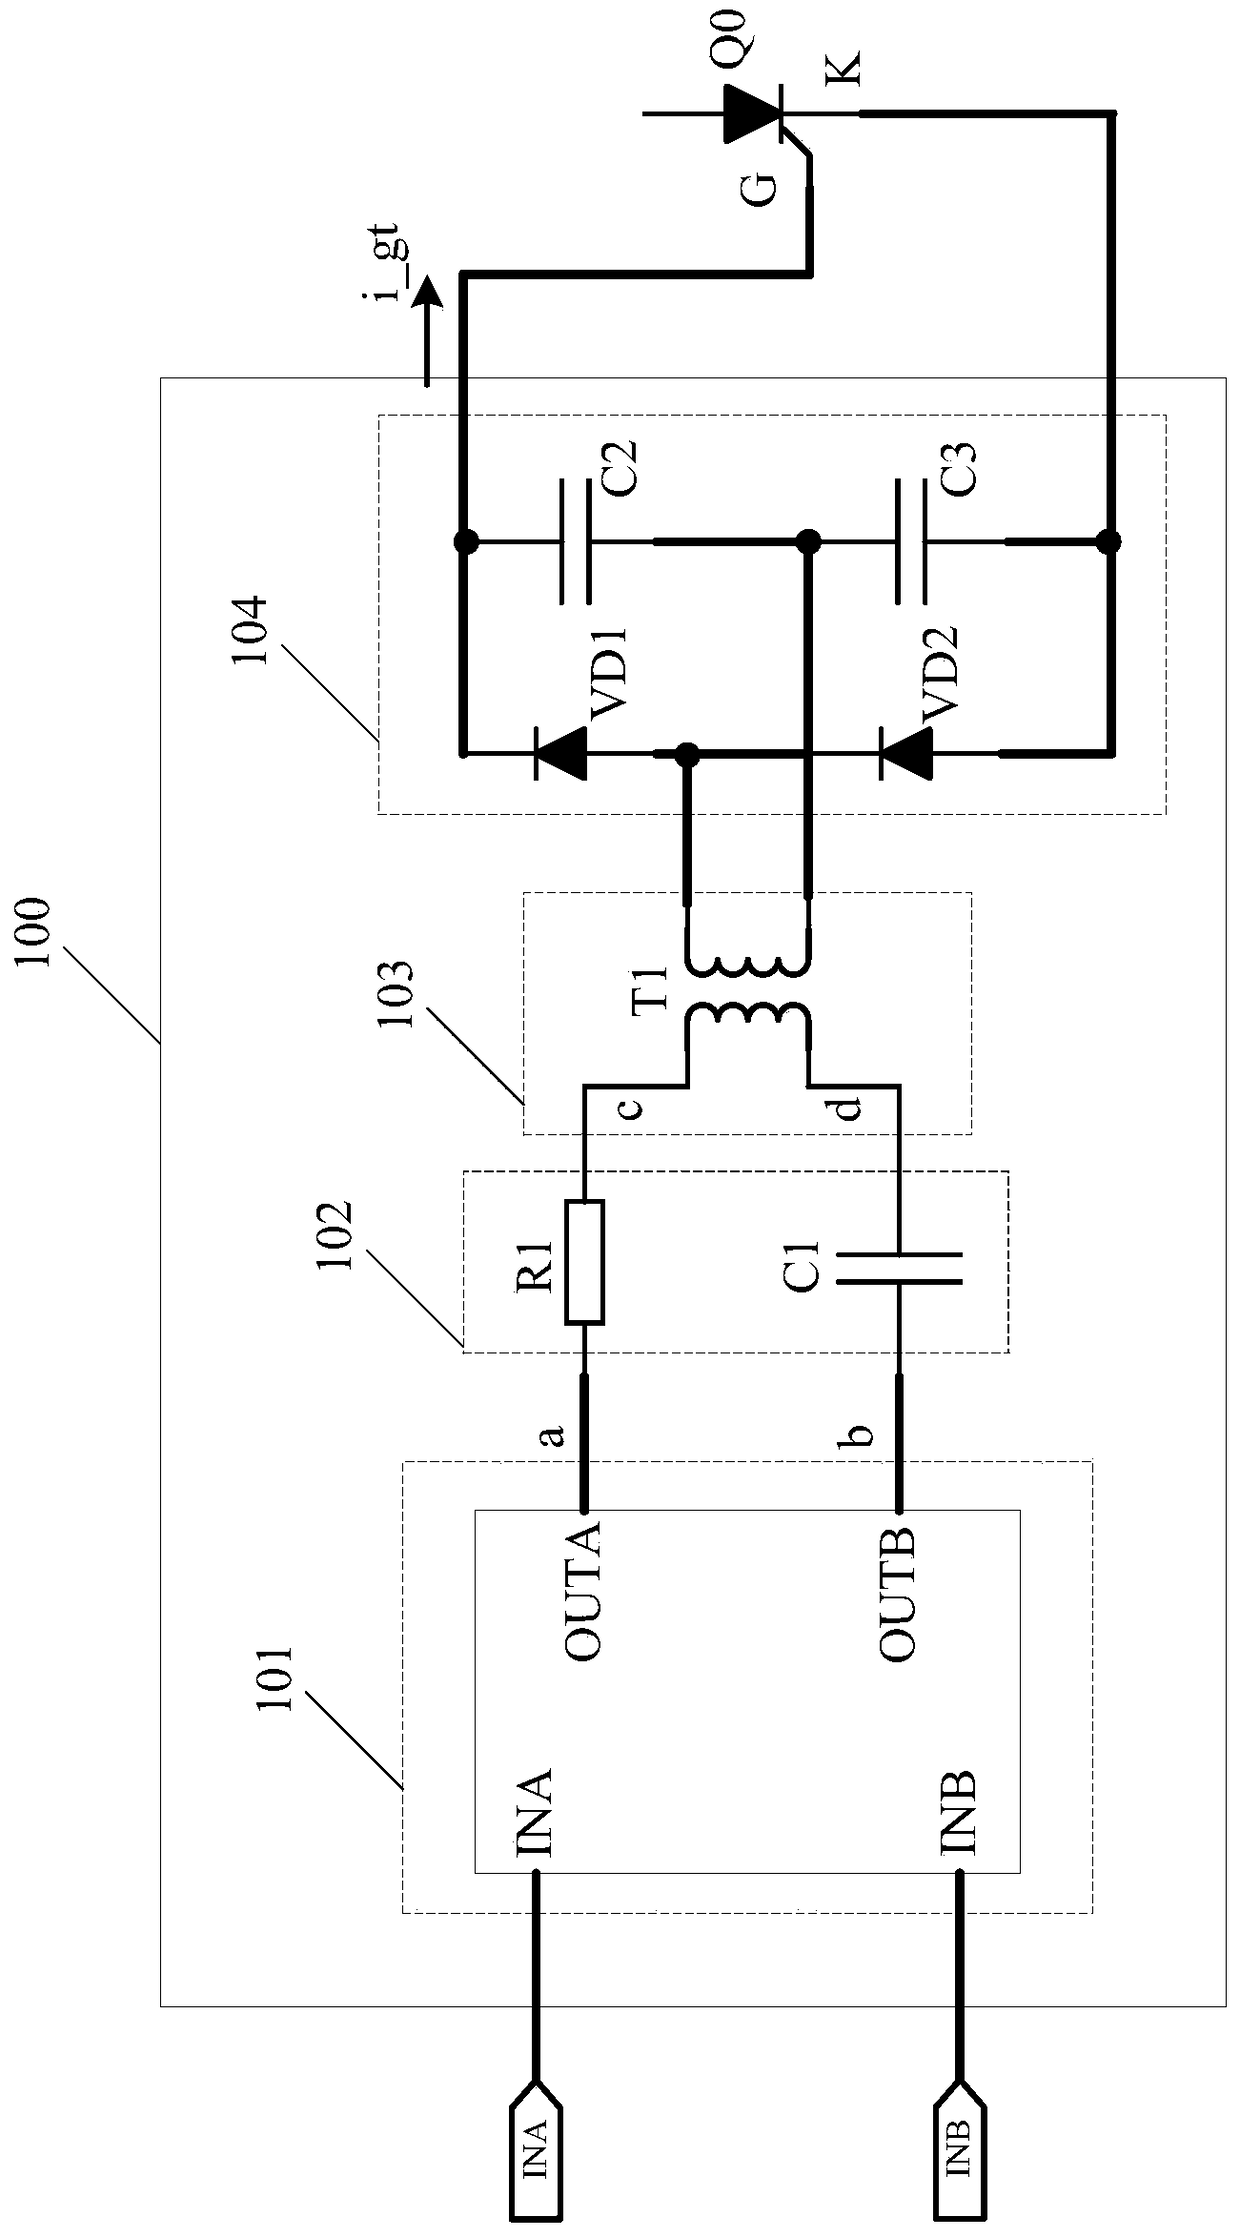 Drive circuits for thyristors and circuits for AC modules